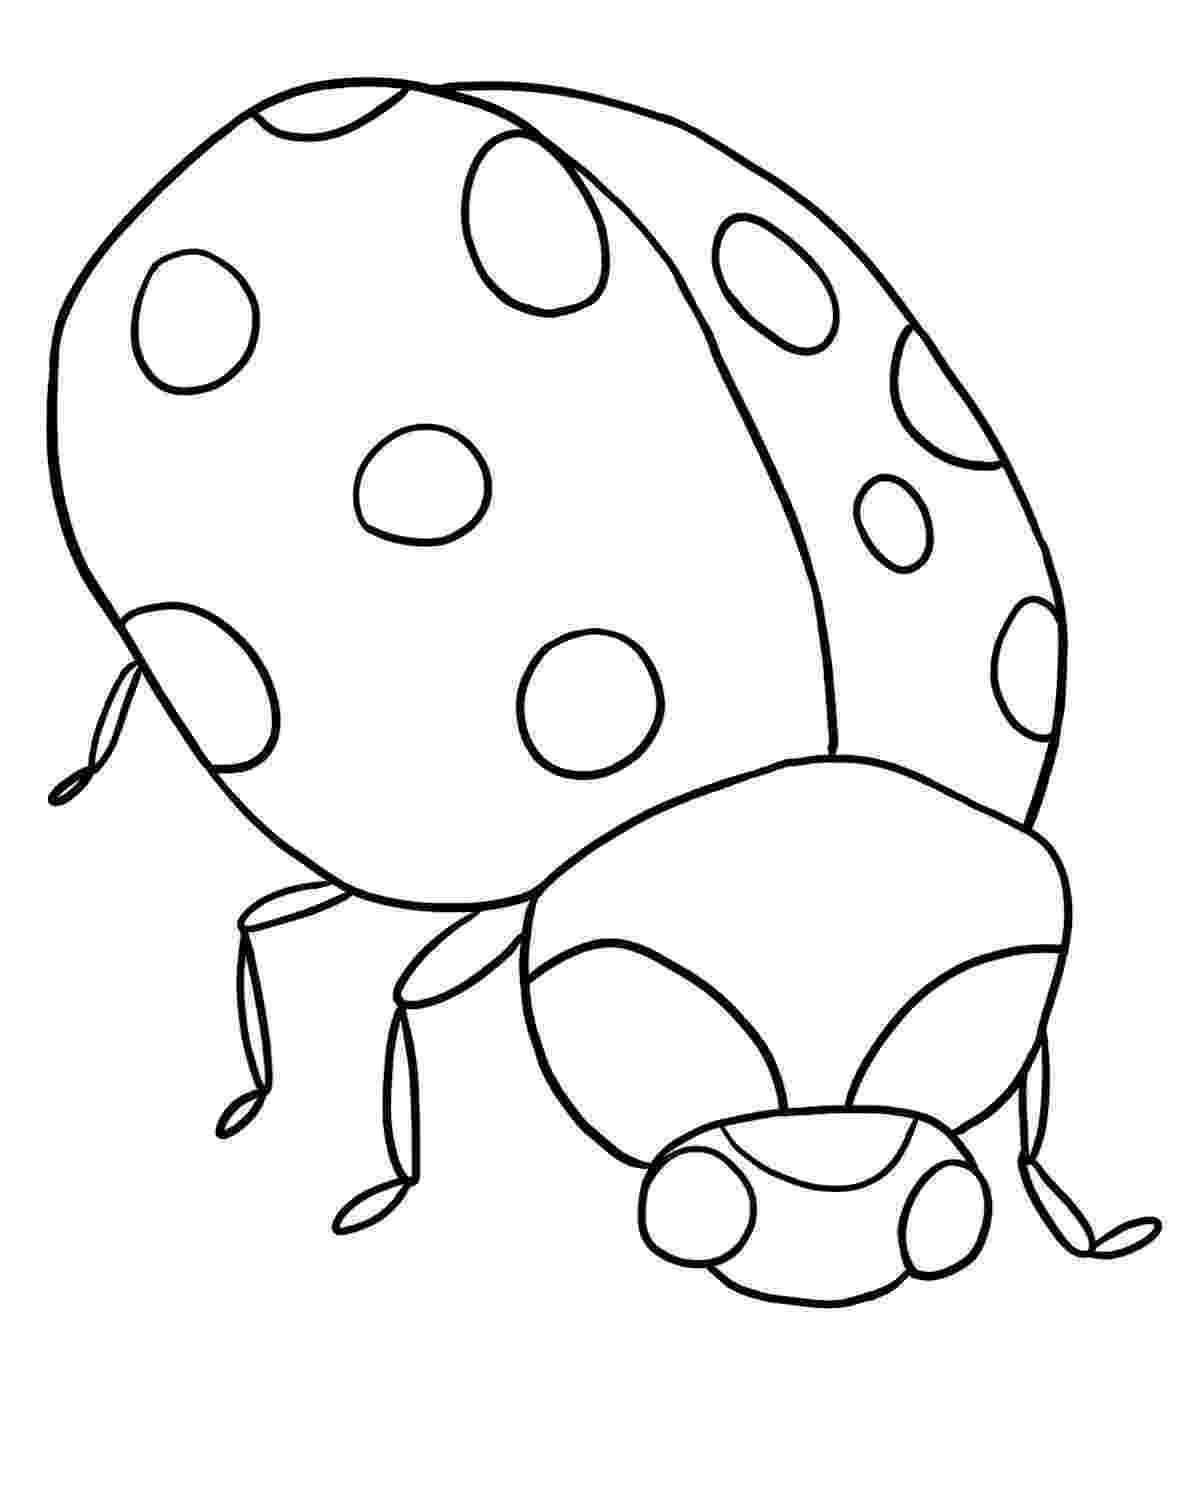 lady bug coloring page free ladybug coloring page lb4 page lady coloring bug 